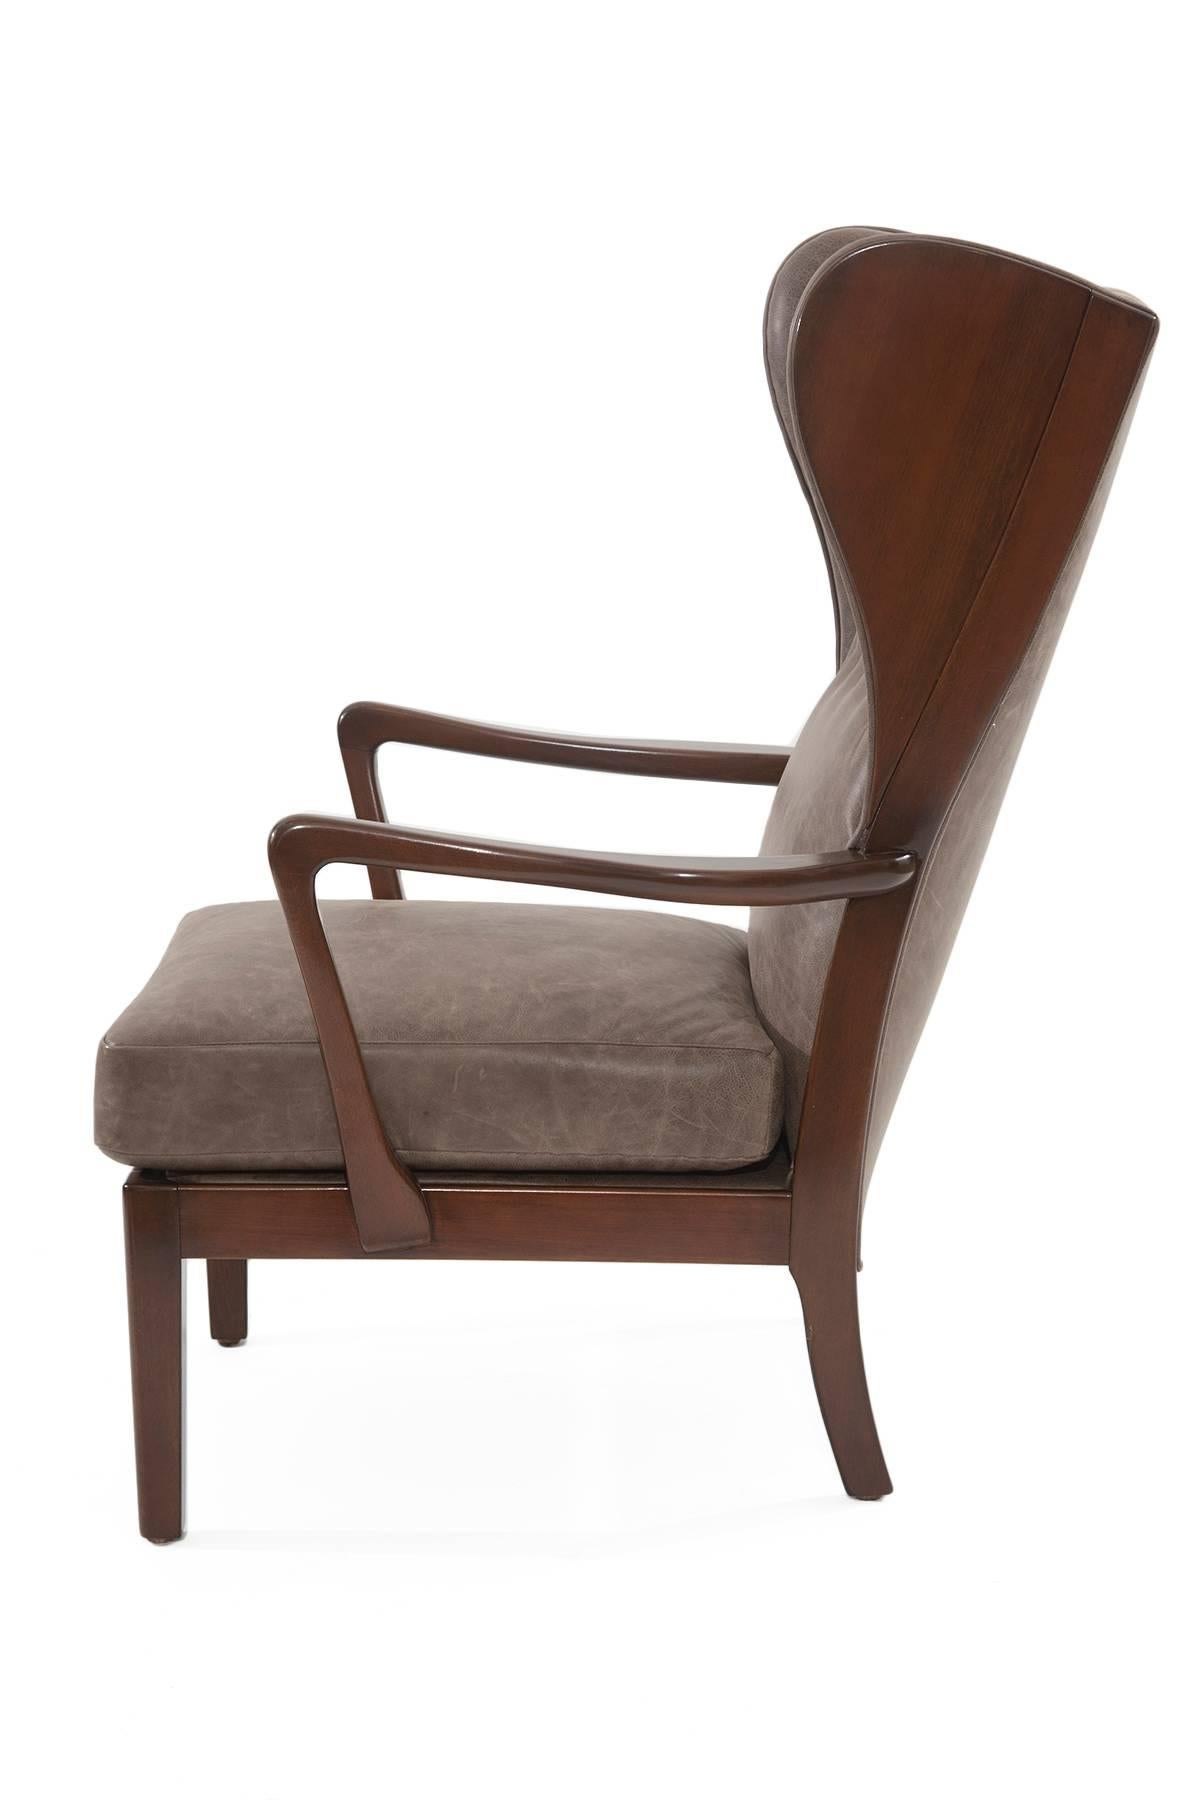 Remarkable Scandinavian wingback lounge chair, circa late 1950s. This example has a newly finished solid maple frame and has been beautifully upholstered in a perfectly broken in cocoa leather.